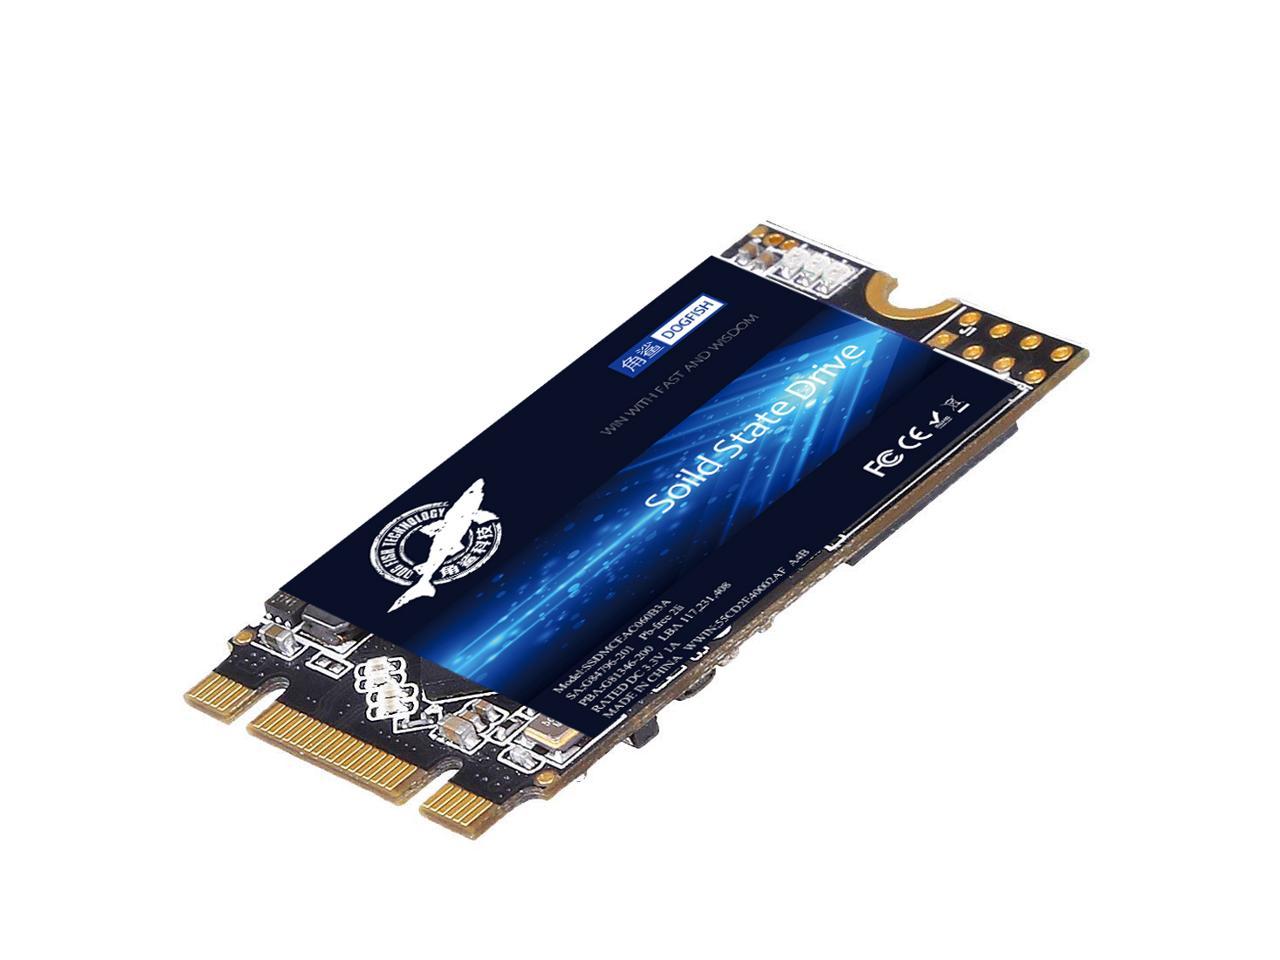 M.2 SSD 1TB Dogfish 3D NAND QLC SATA III 6 Gb/s, Internal State Drive Compatible with PC (M.2 2242 1TB) - Newegg.com